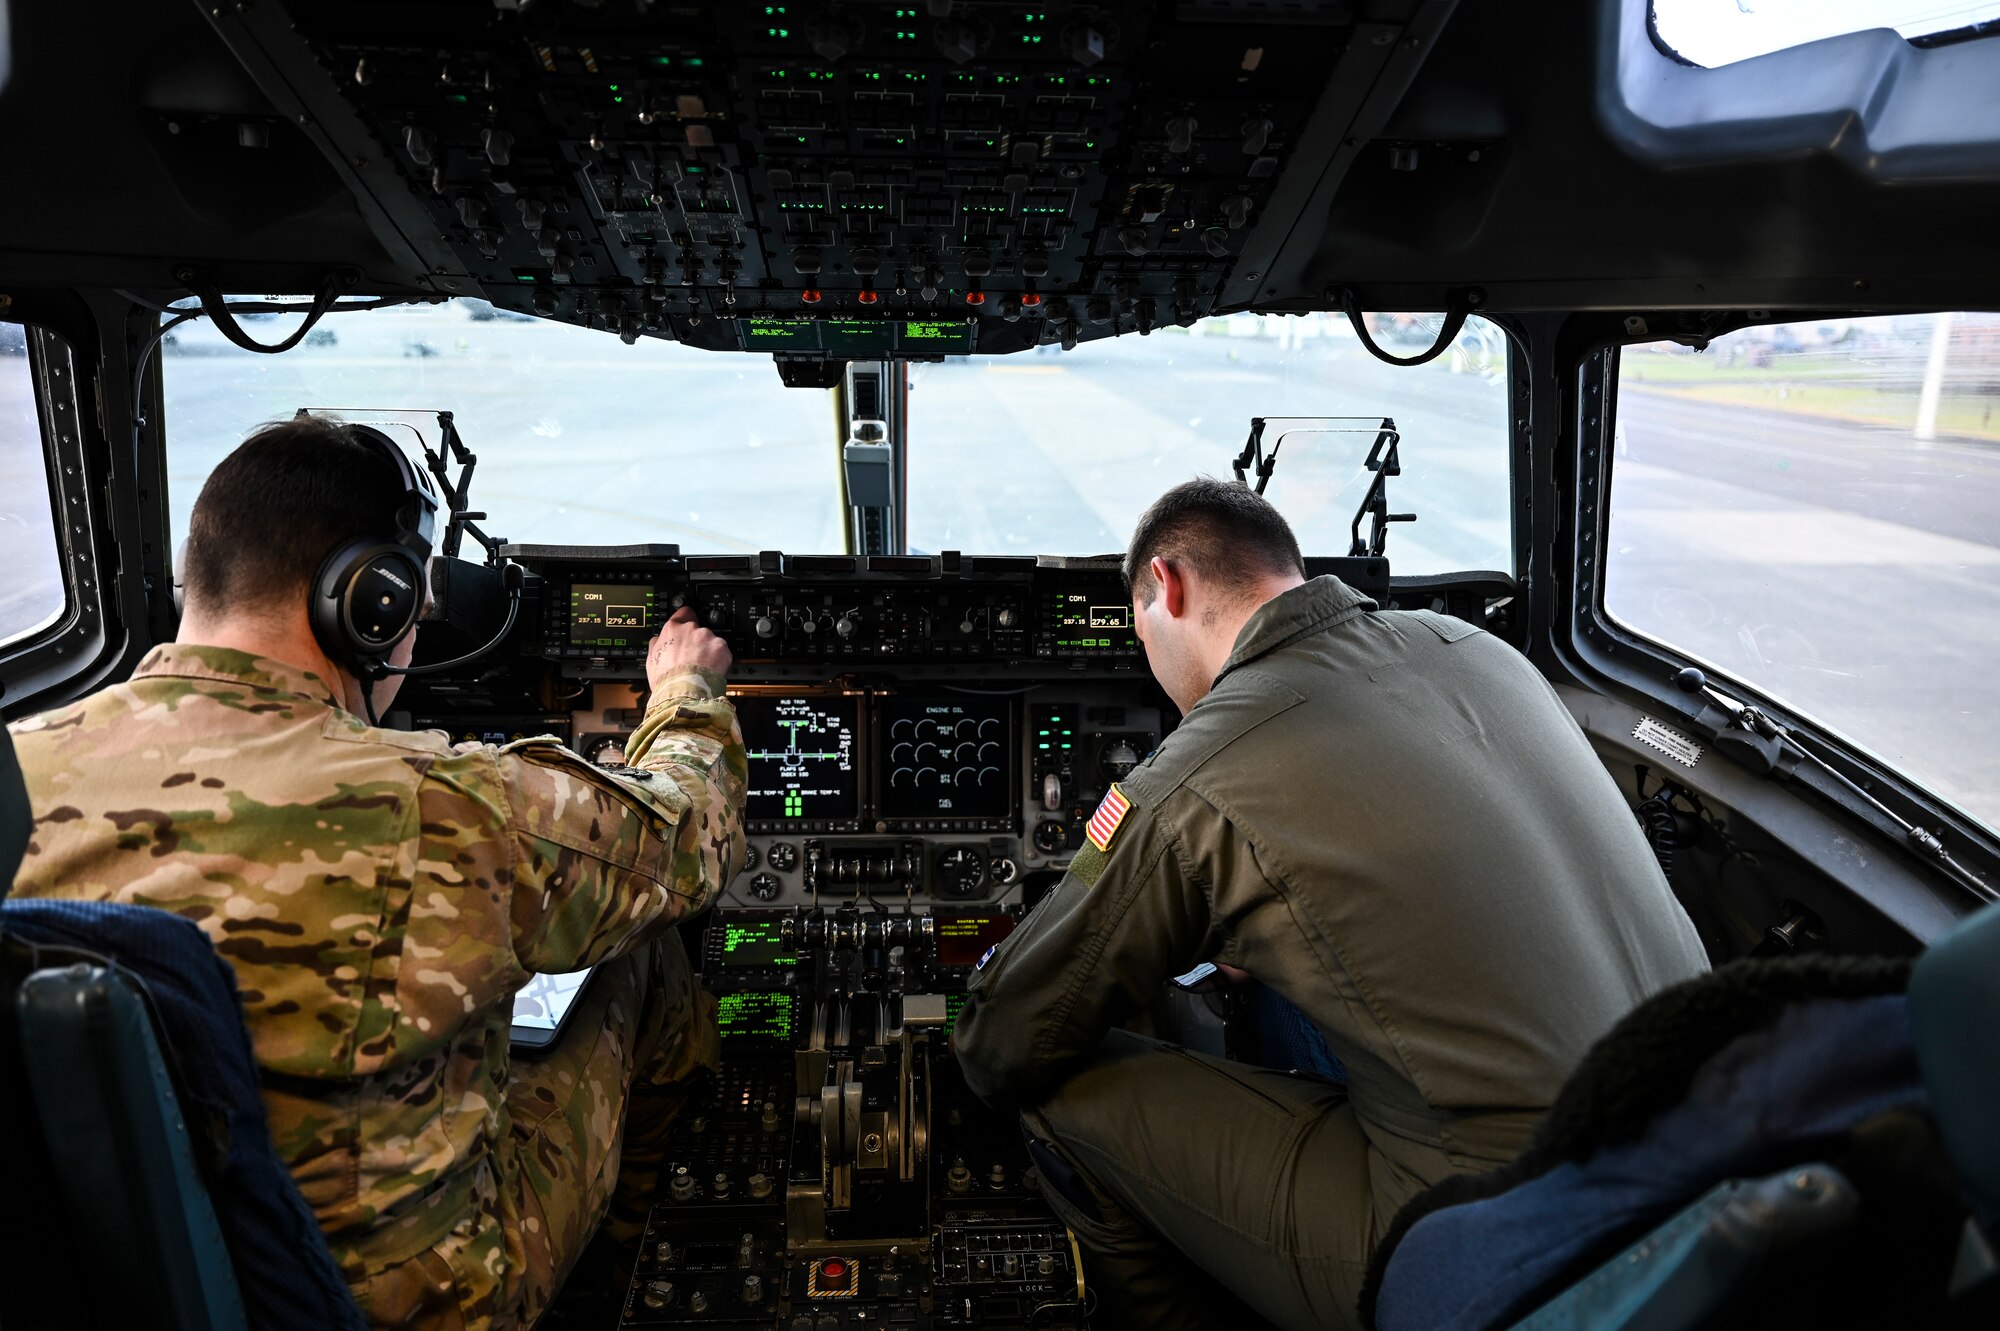 U.S. Air Force Capt. Nick Baker, left, and 1st Lt. Ian Marlin, 8th Airlift Squadron co-pilots, prepare for an airlift mission as part of Exercise Rainier War at Joint Base Lewis-McChord, Washington, April 28, 2021. Rainier War tests the 62nd Airlift Wing's capability to plan, generate and execute a deployment tasking, sustain contingency operations, demonstrate full spectrum readiness while executing agile combat employment in a contested, degraded and operationally limited environment. (U.S. Air Force photo by Master Sgt. Julius Delos Reyes)